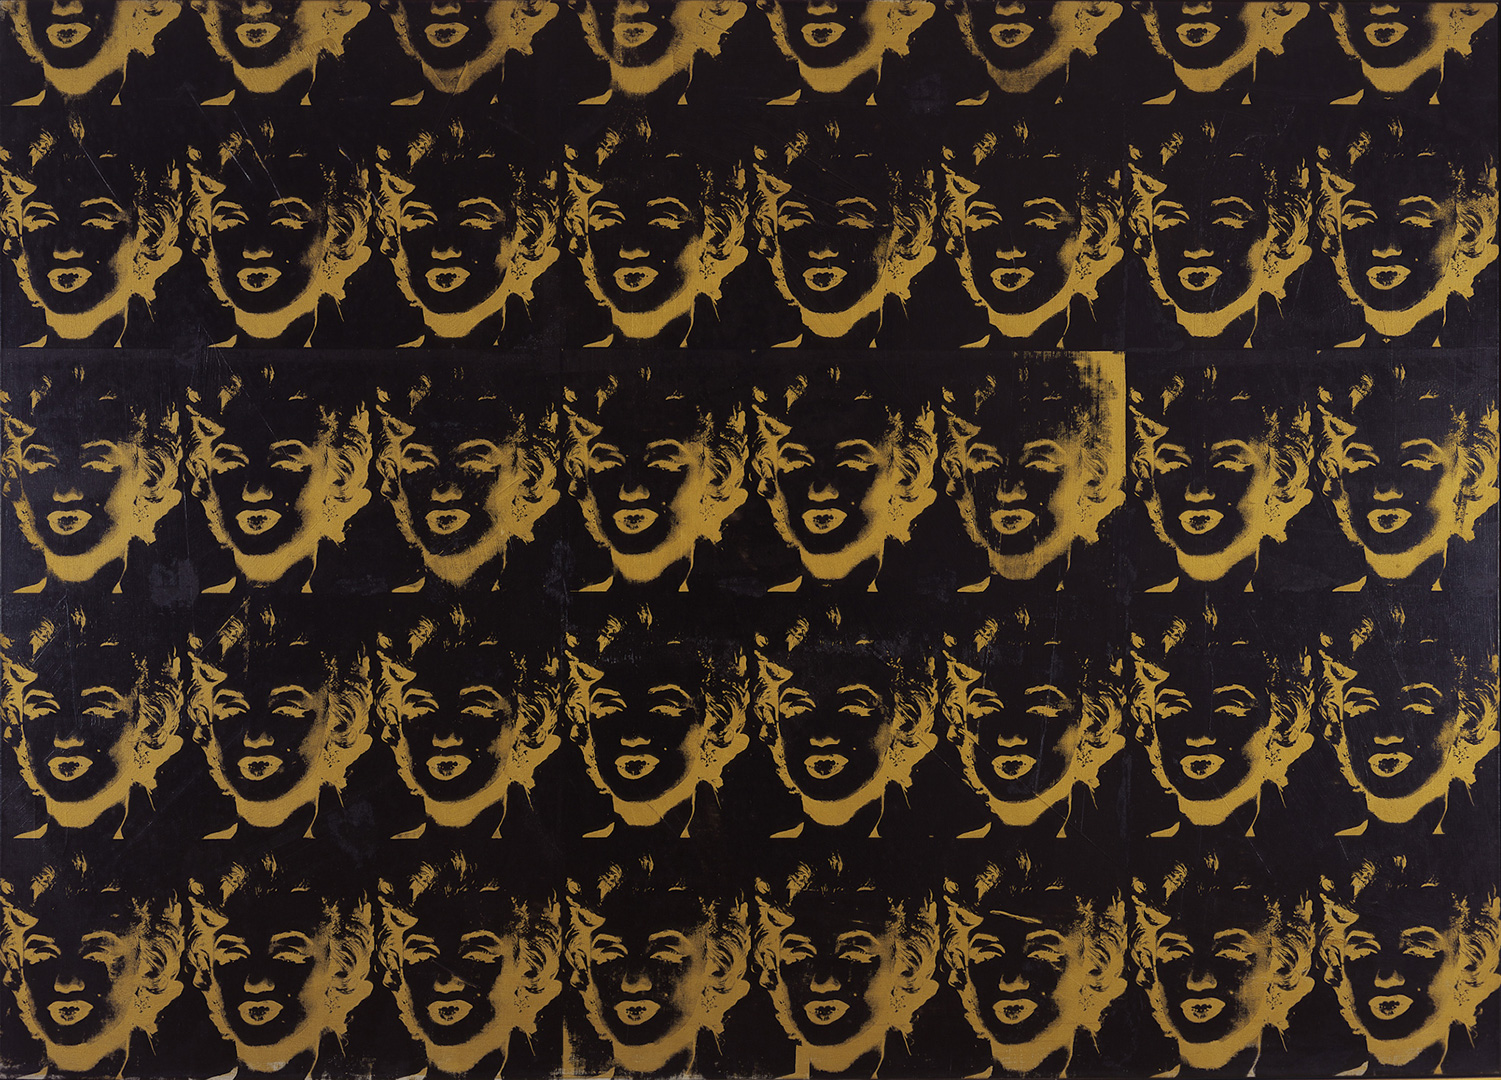 Andy Warhol - 40 Gold Marilyns, 1980, silkscreen ink and synthetic polymer paint on canvas